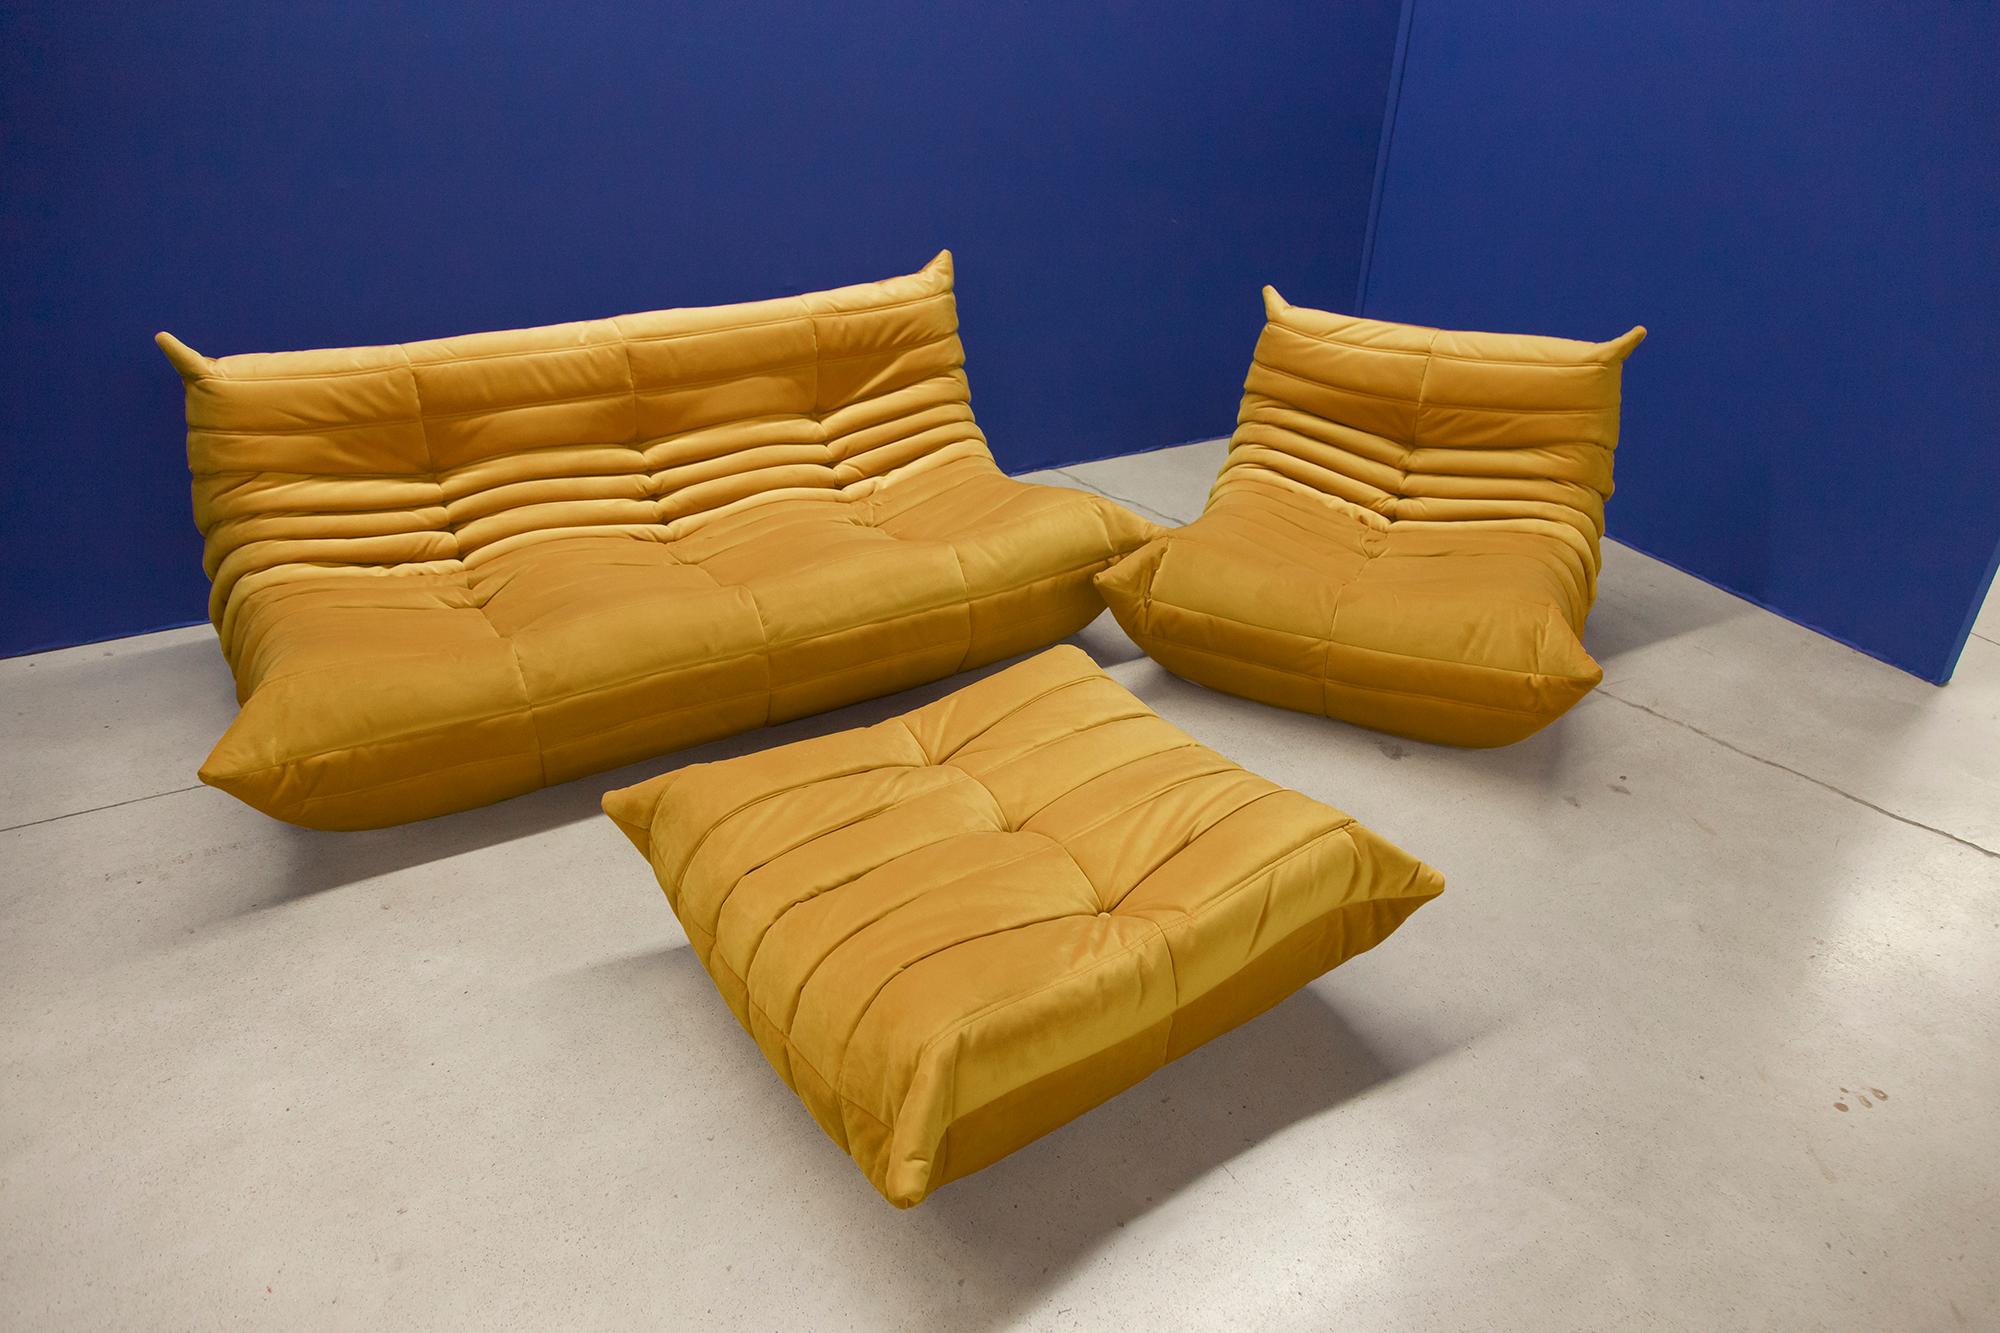 Three-piece Togo set, Design by Michel Ducaroy, manufactured by Ligne Roset this Togo living room set was designed by Michel Ducaroy in 1974 and was manufactured by Ligne Roset in France. It has been reupholstered in golden yellow high quality